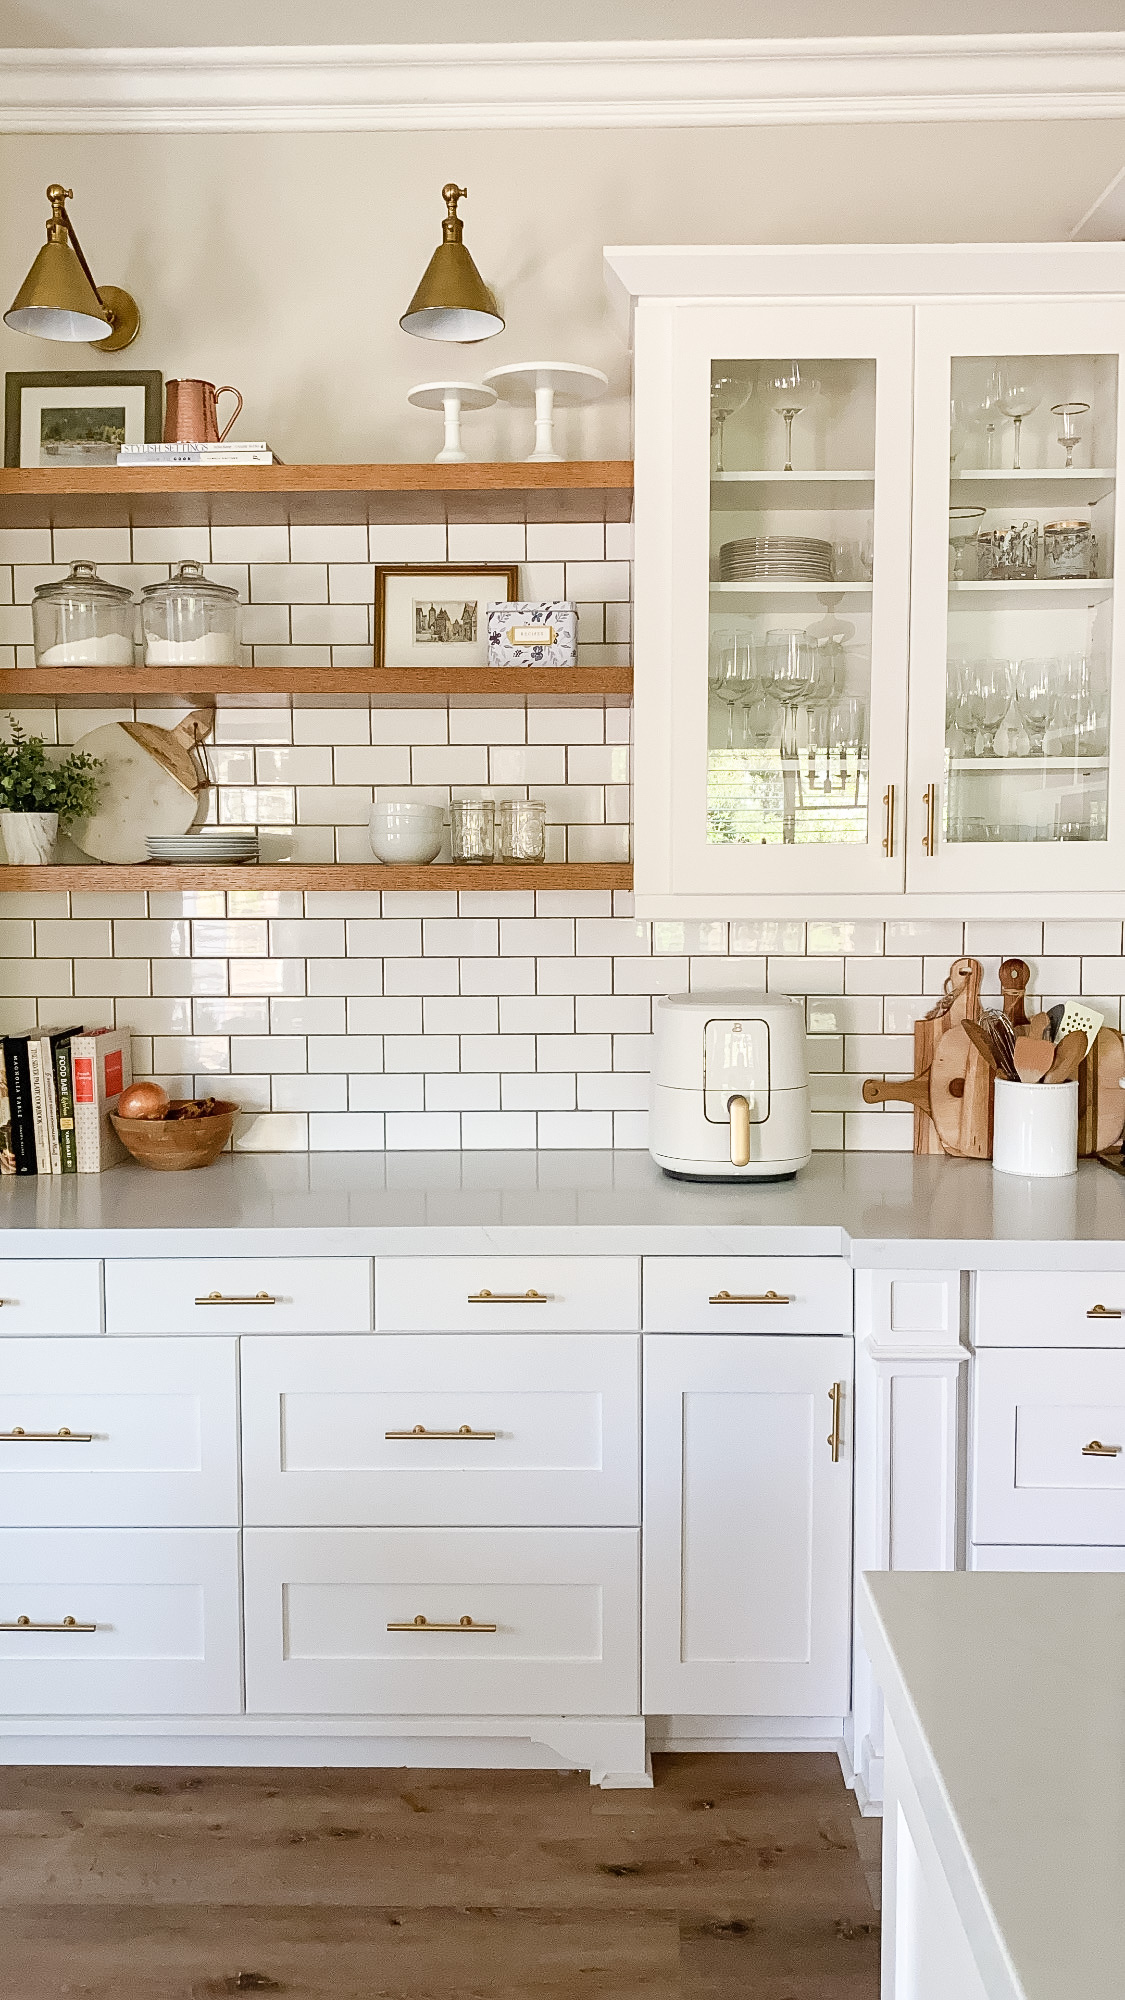 The 'Beautiful' Items From Drew Barrymore's New Kitchen Line (That